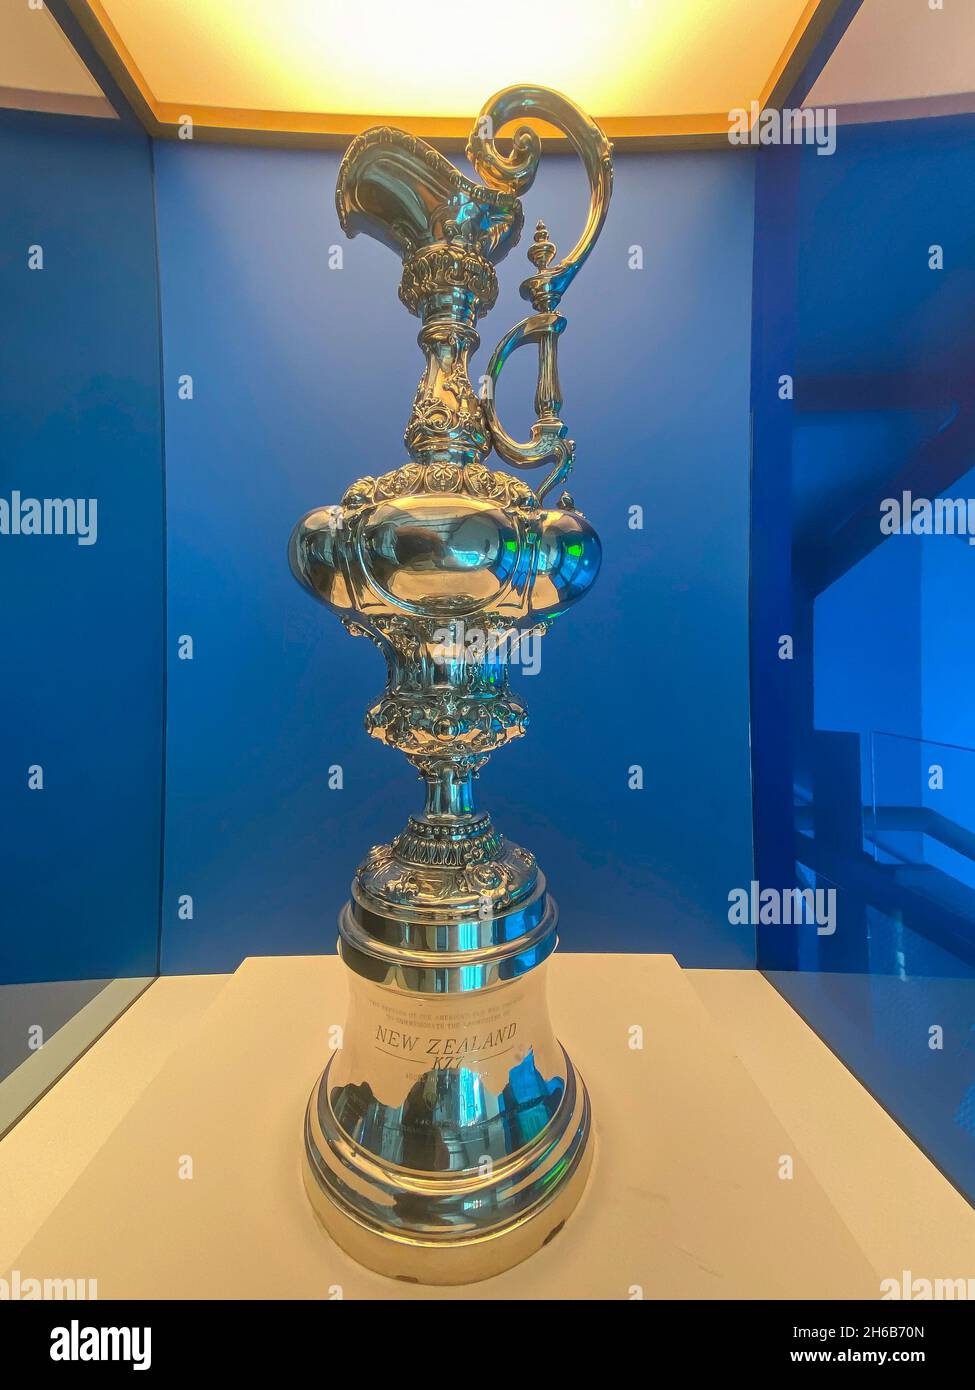 America's Cup trophy on display in New Zealnd Maritime Museum (Hui Te Ananui a Tangaroa), Viaduct Harbour, Auckland, New Zealand Stock Photo